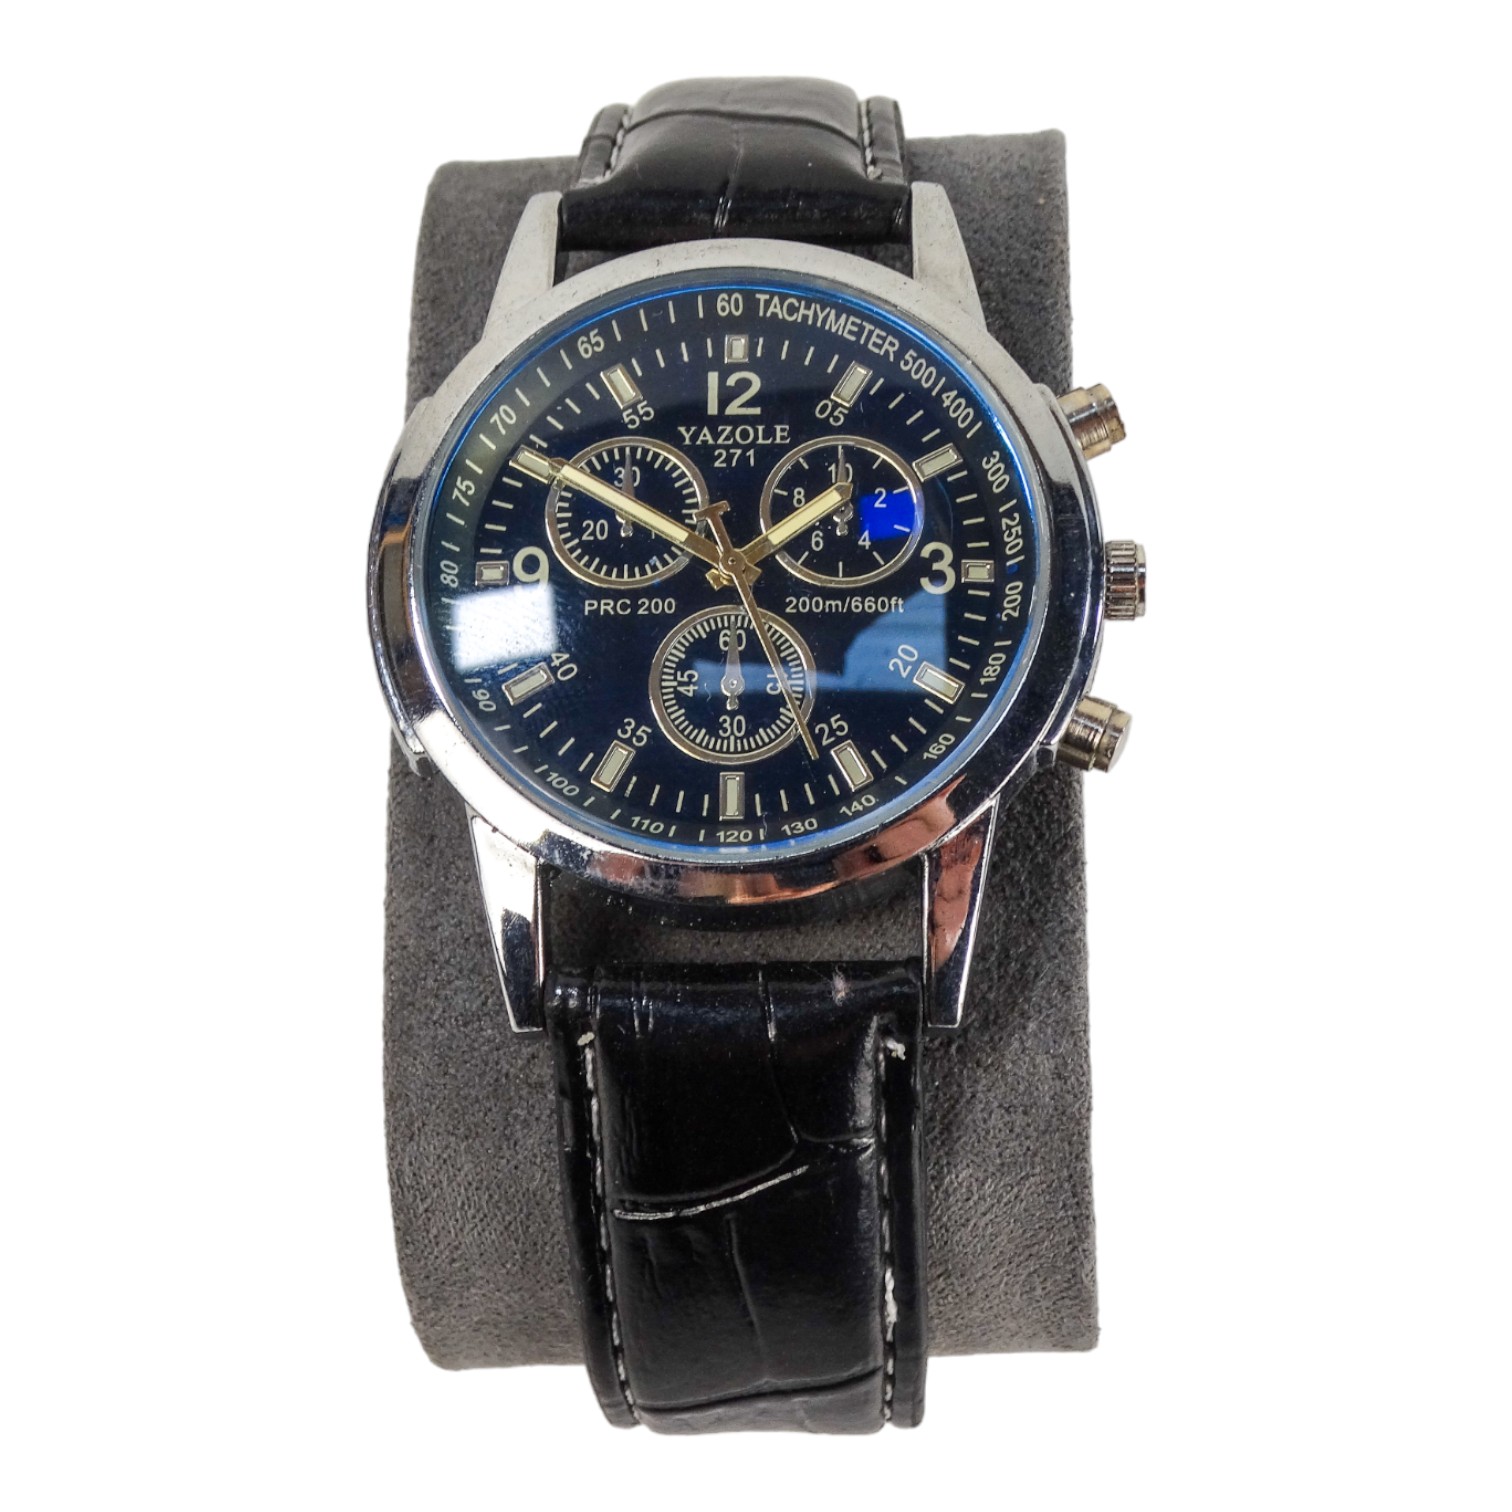 A Yazole stainless steel cased gentleman's wristwatch - the blue dial with subsidiary dials, with